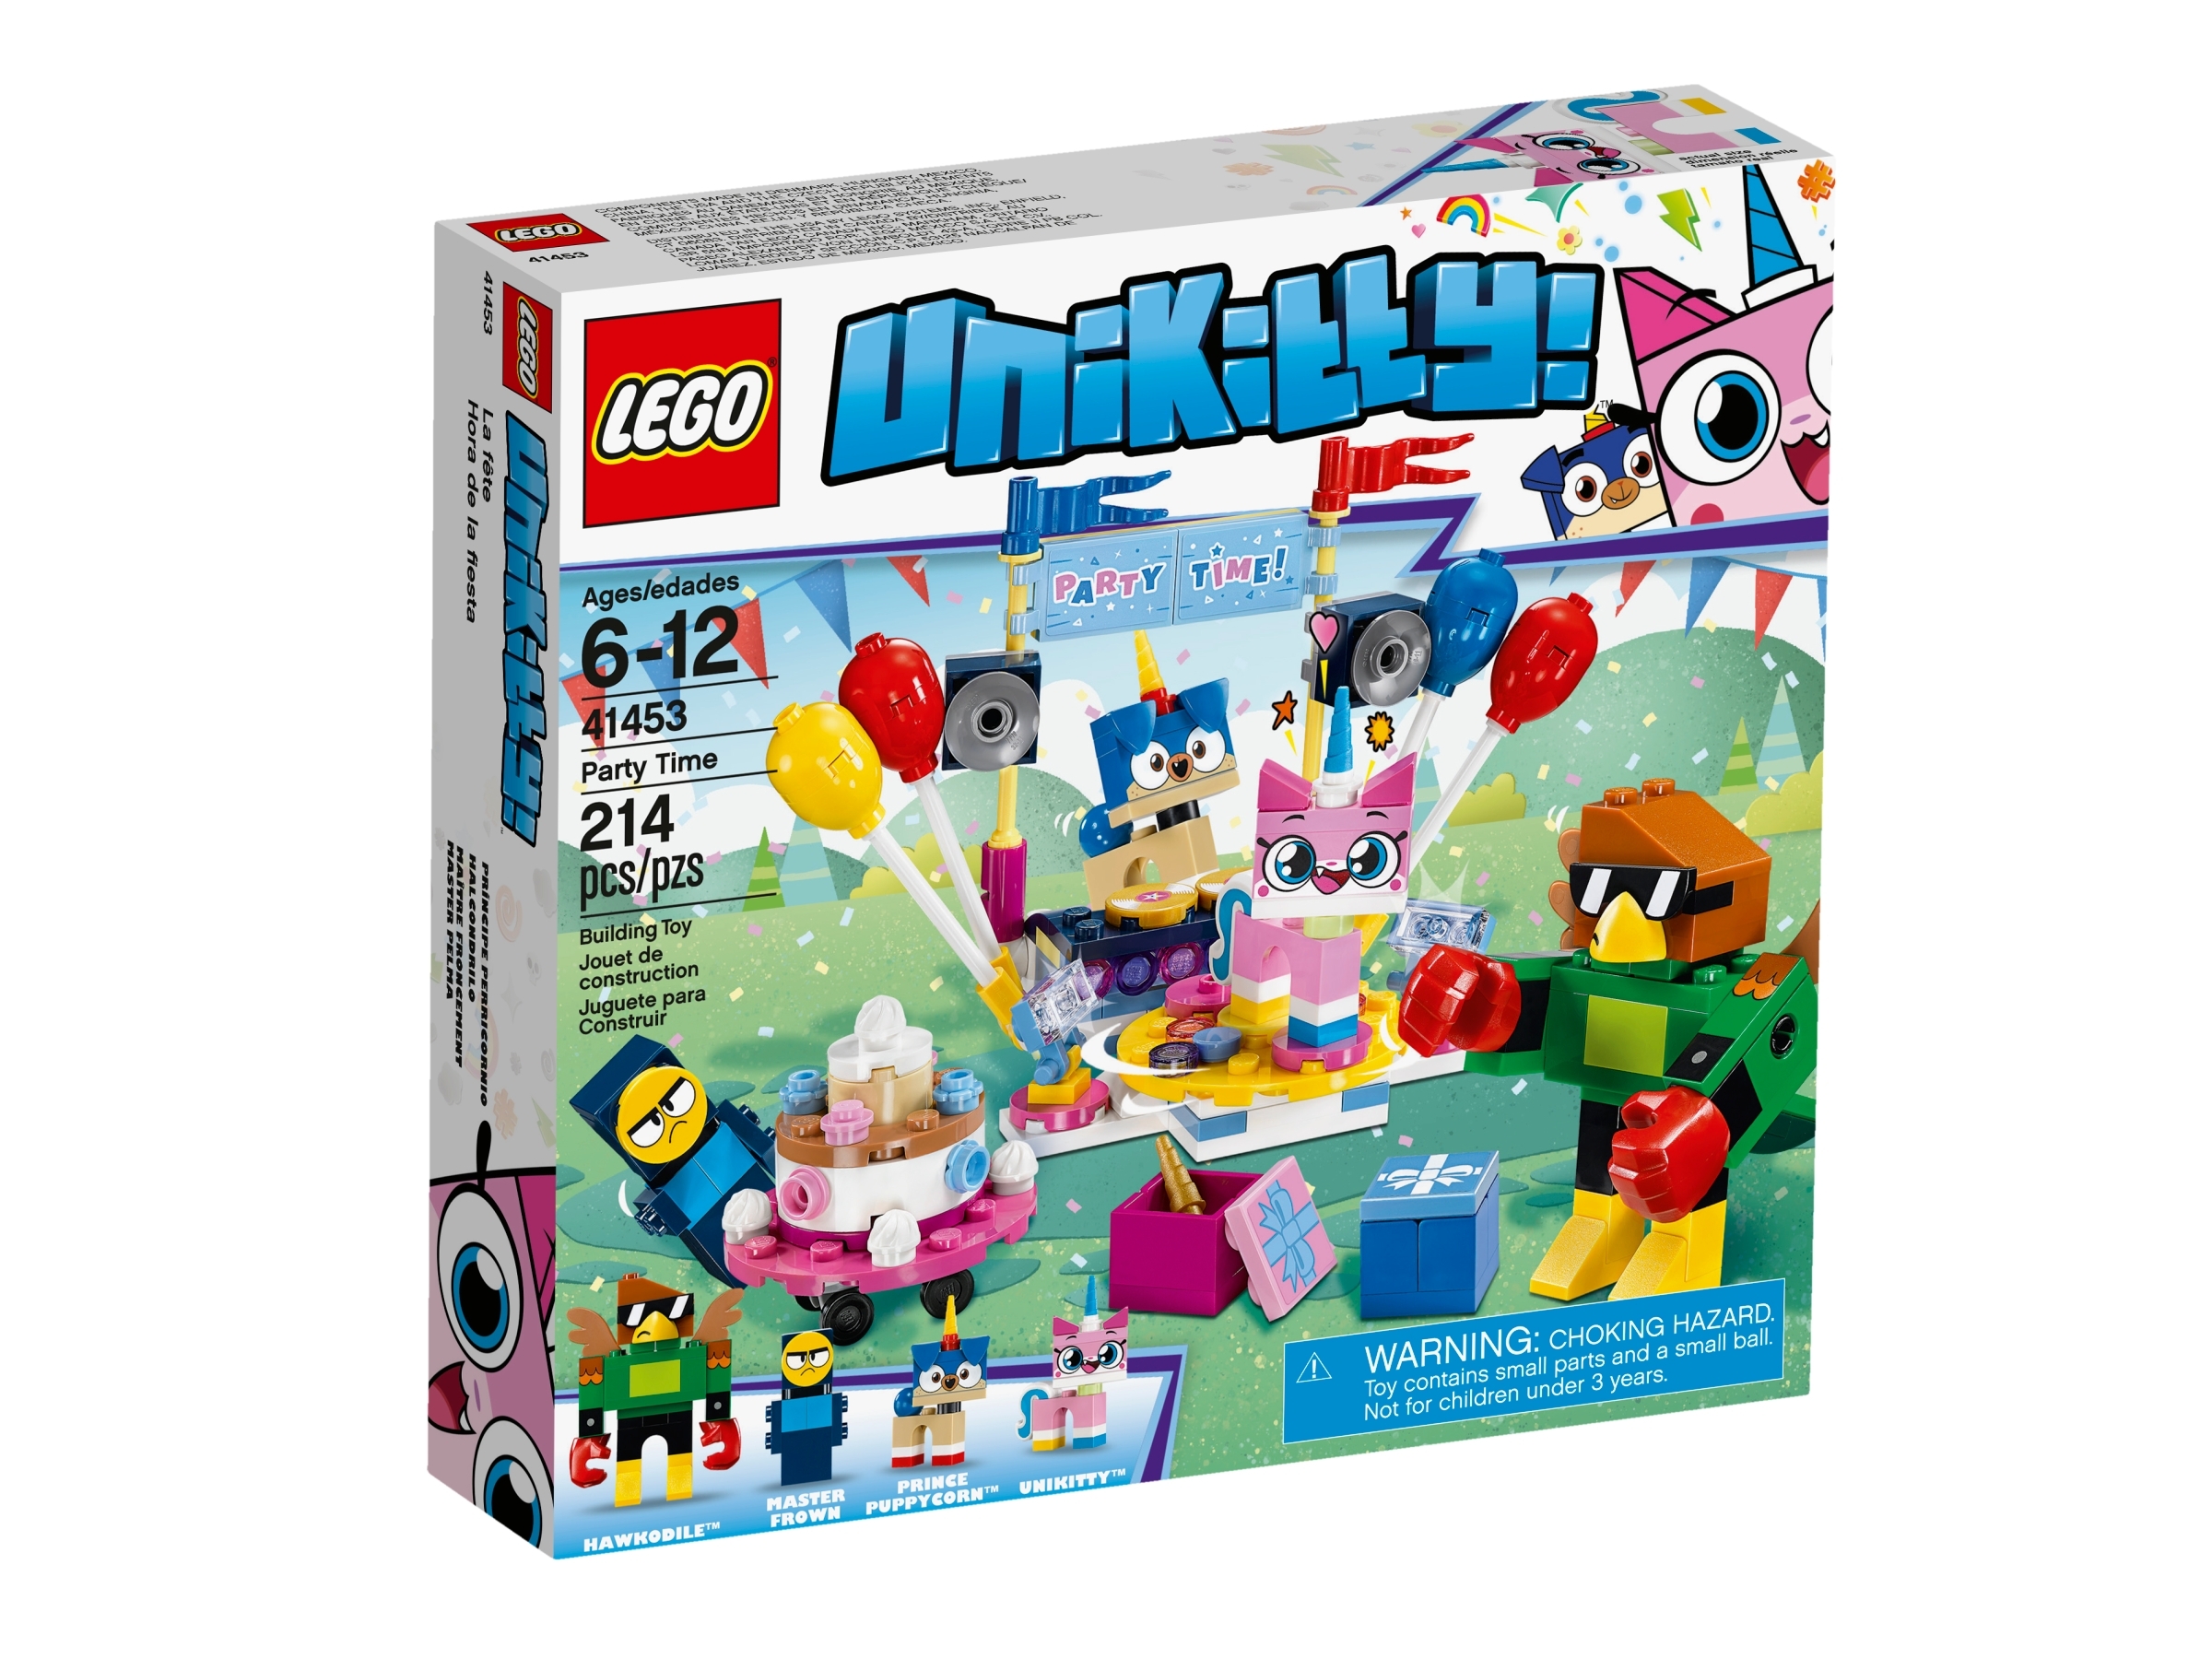 LEGO Unikitty Party Time 41453 Building Kit 214pcs for sale online 